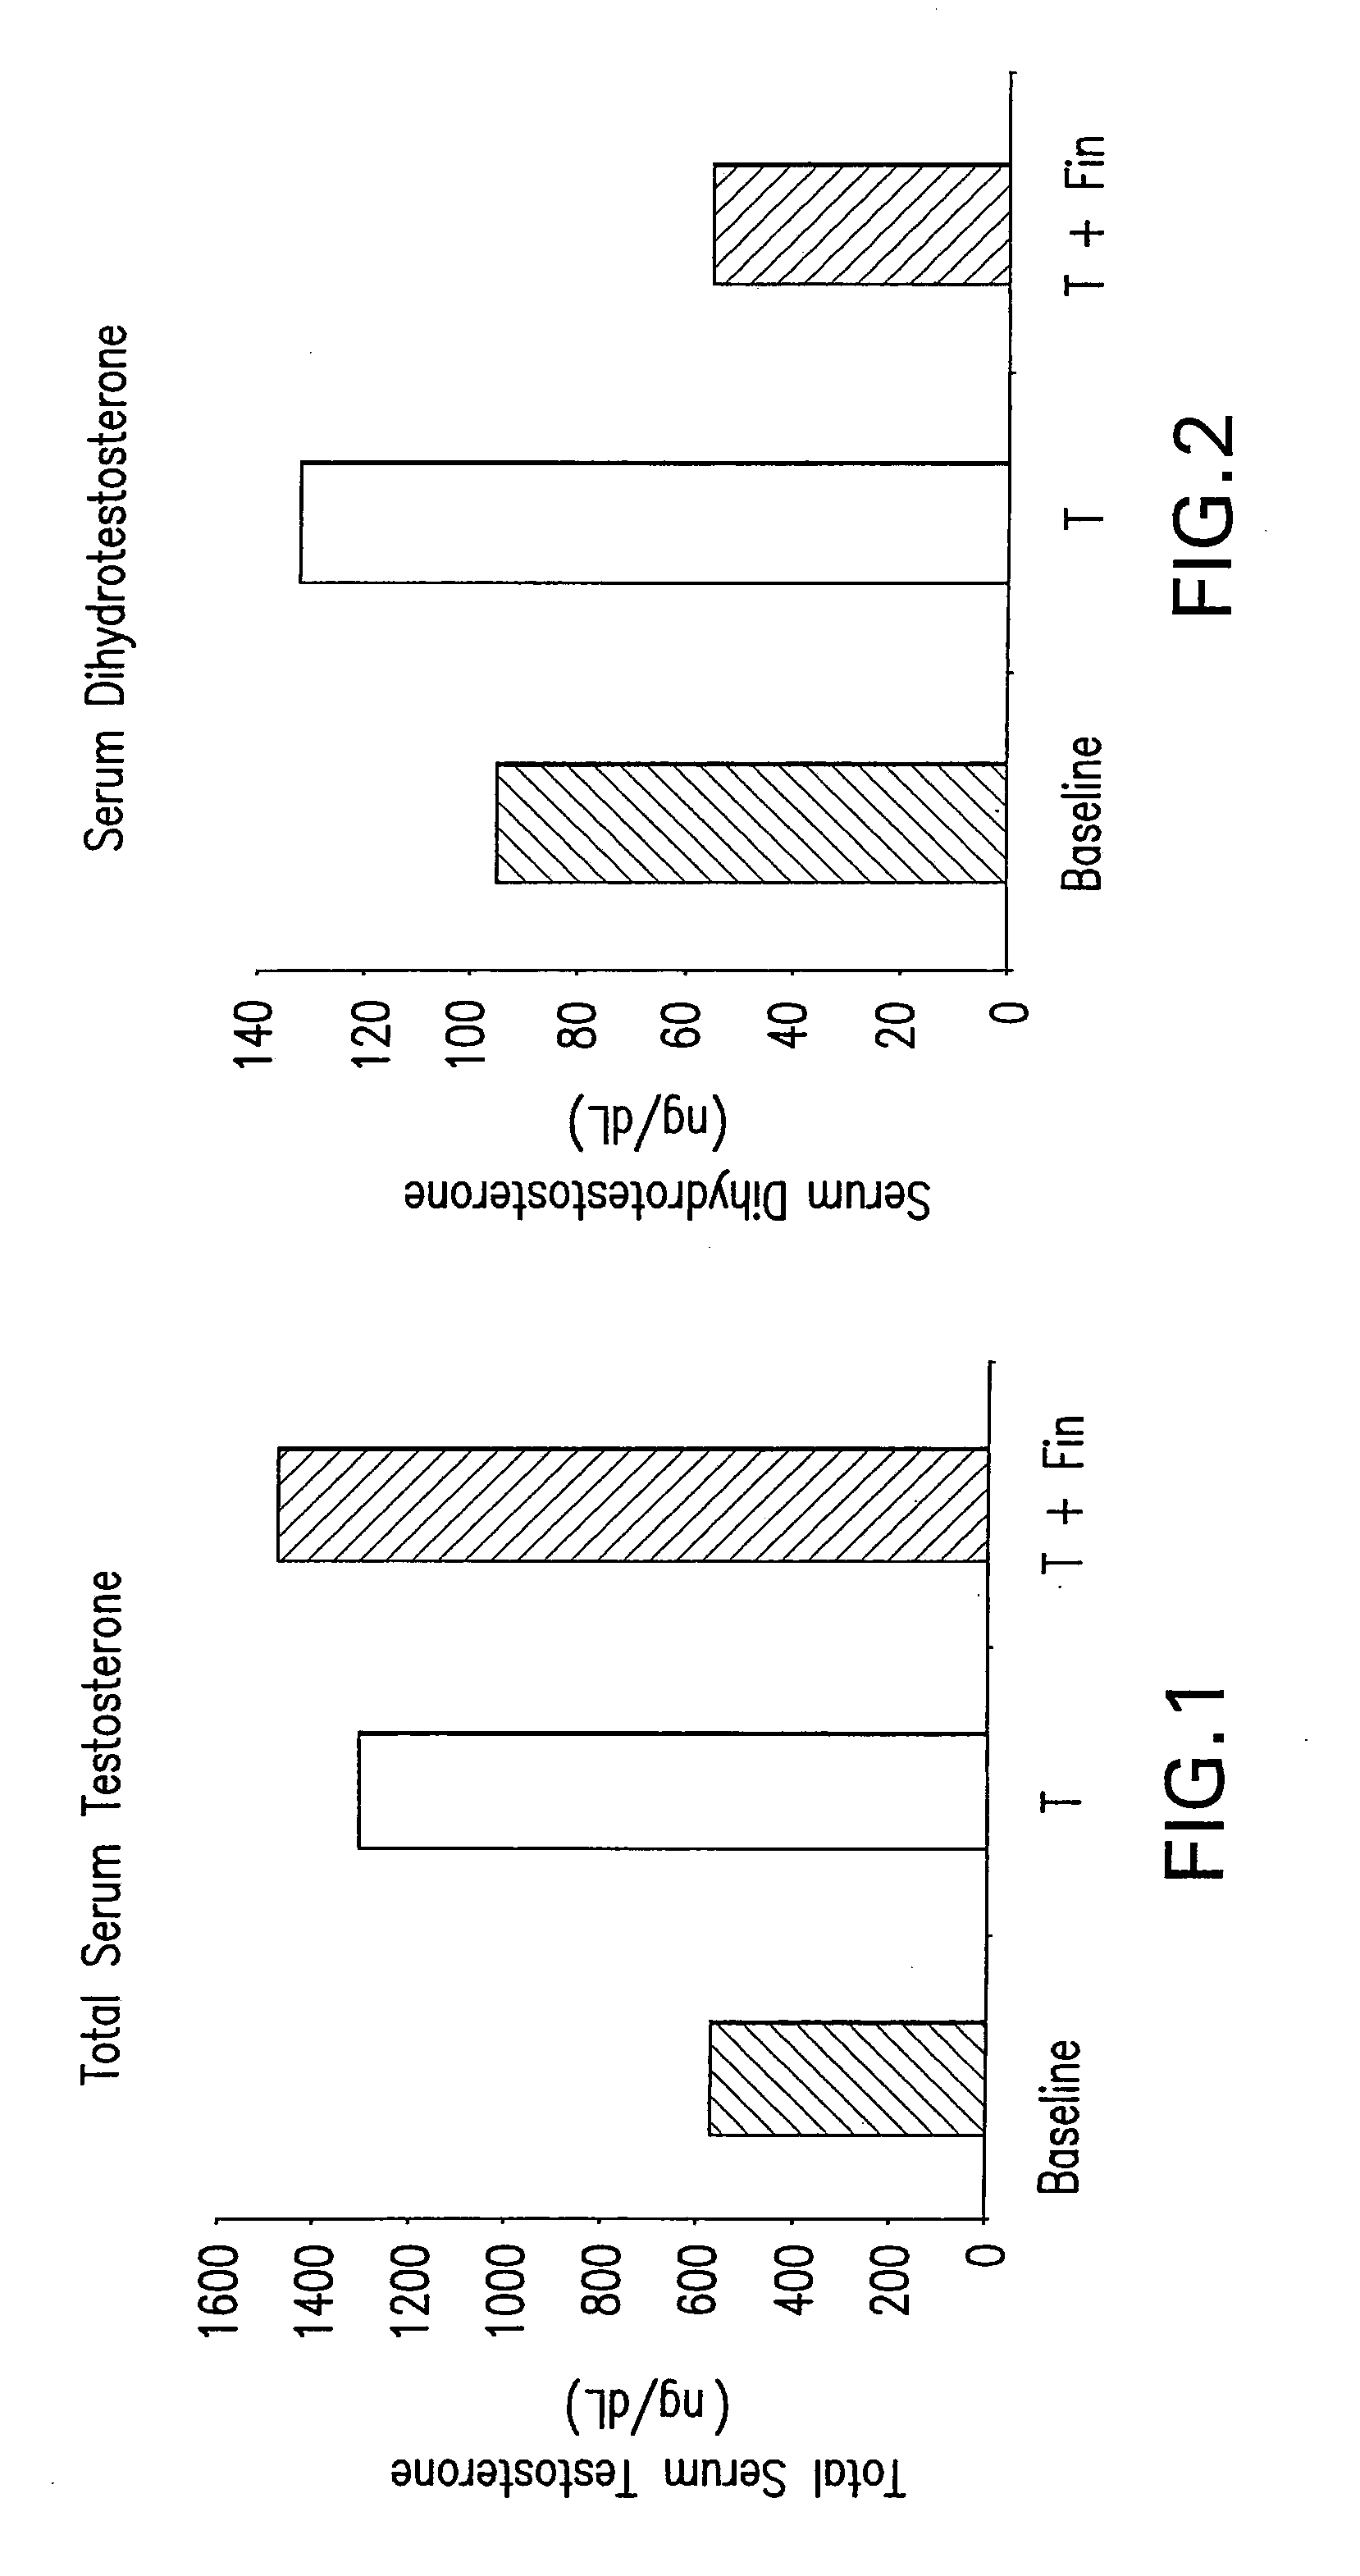 Method of treating men with testosterone supplement and 5alpha-reductase inhibitor